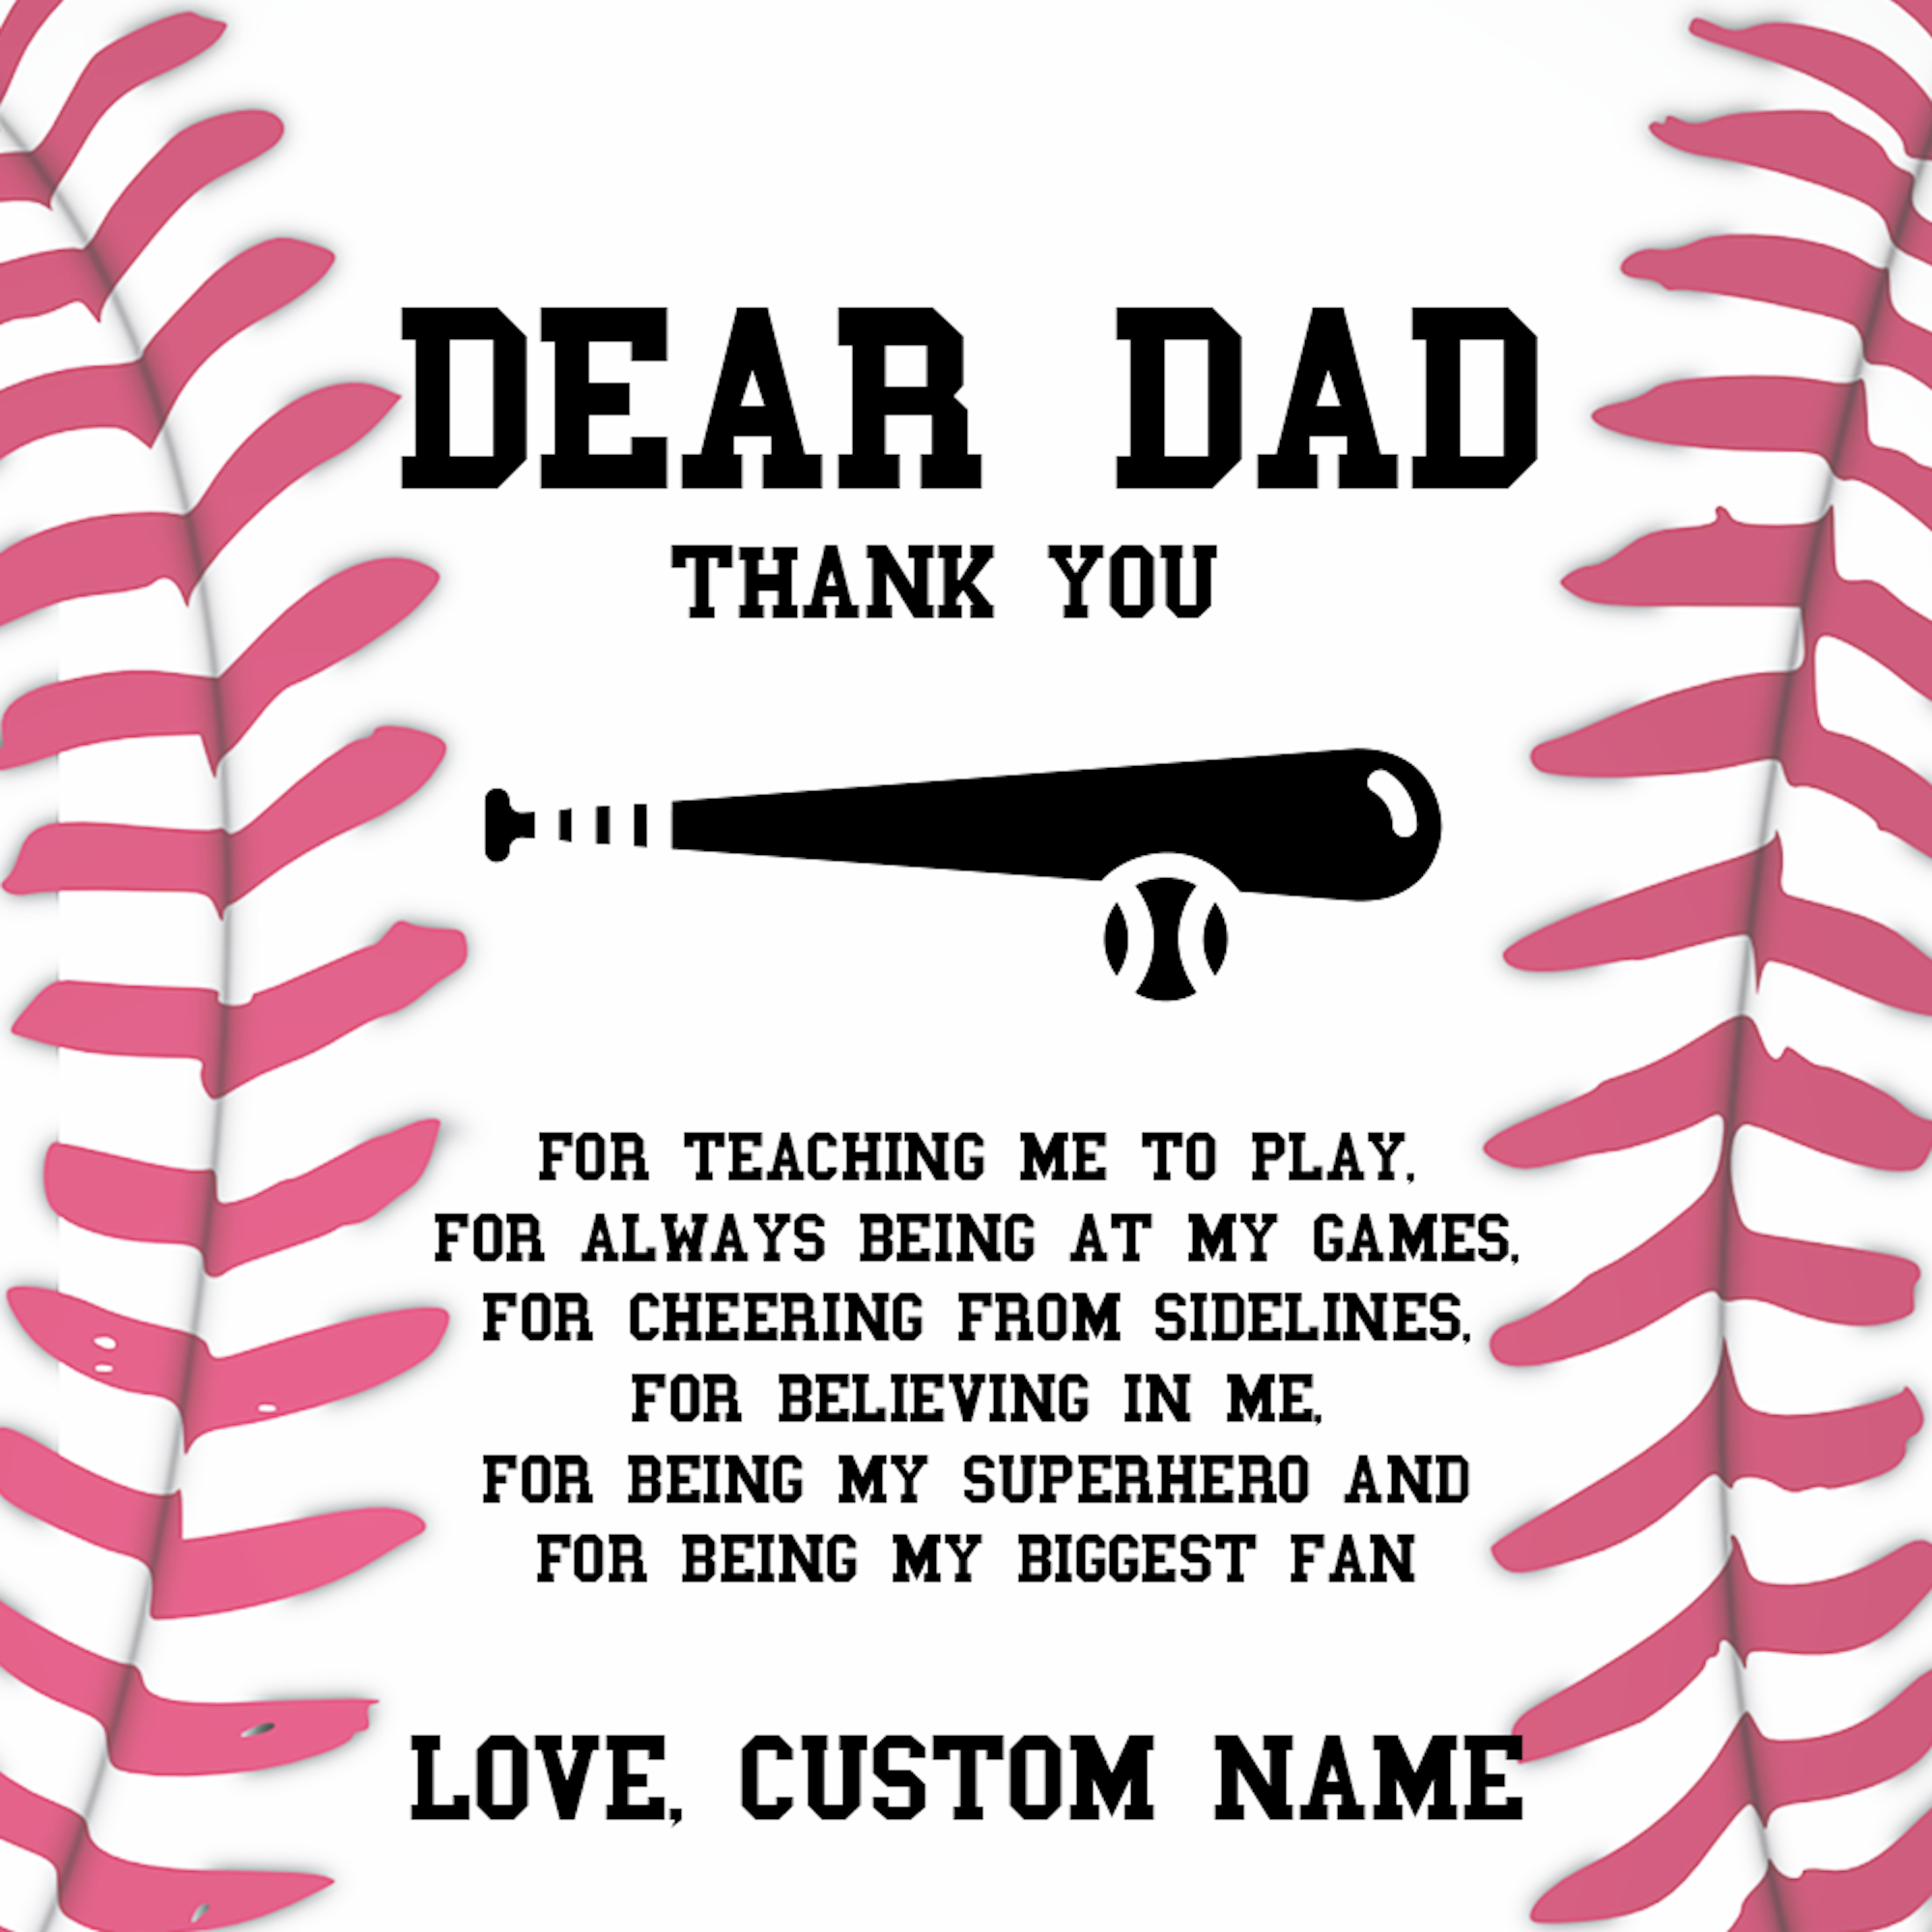 Baseball Dad Watch | Personalize Up To 3 Kid Name | Gifts For Christmas | Happy Fathers Day | Best Father Present